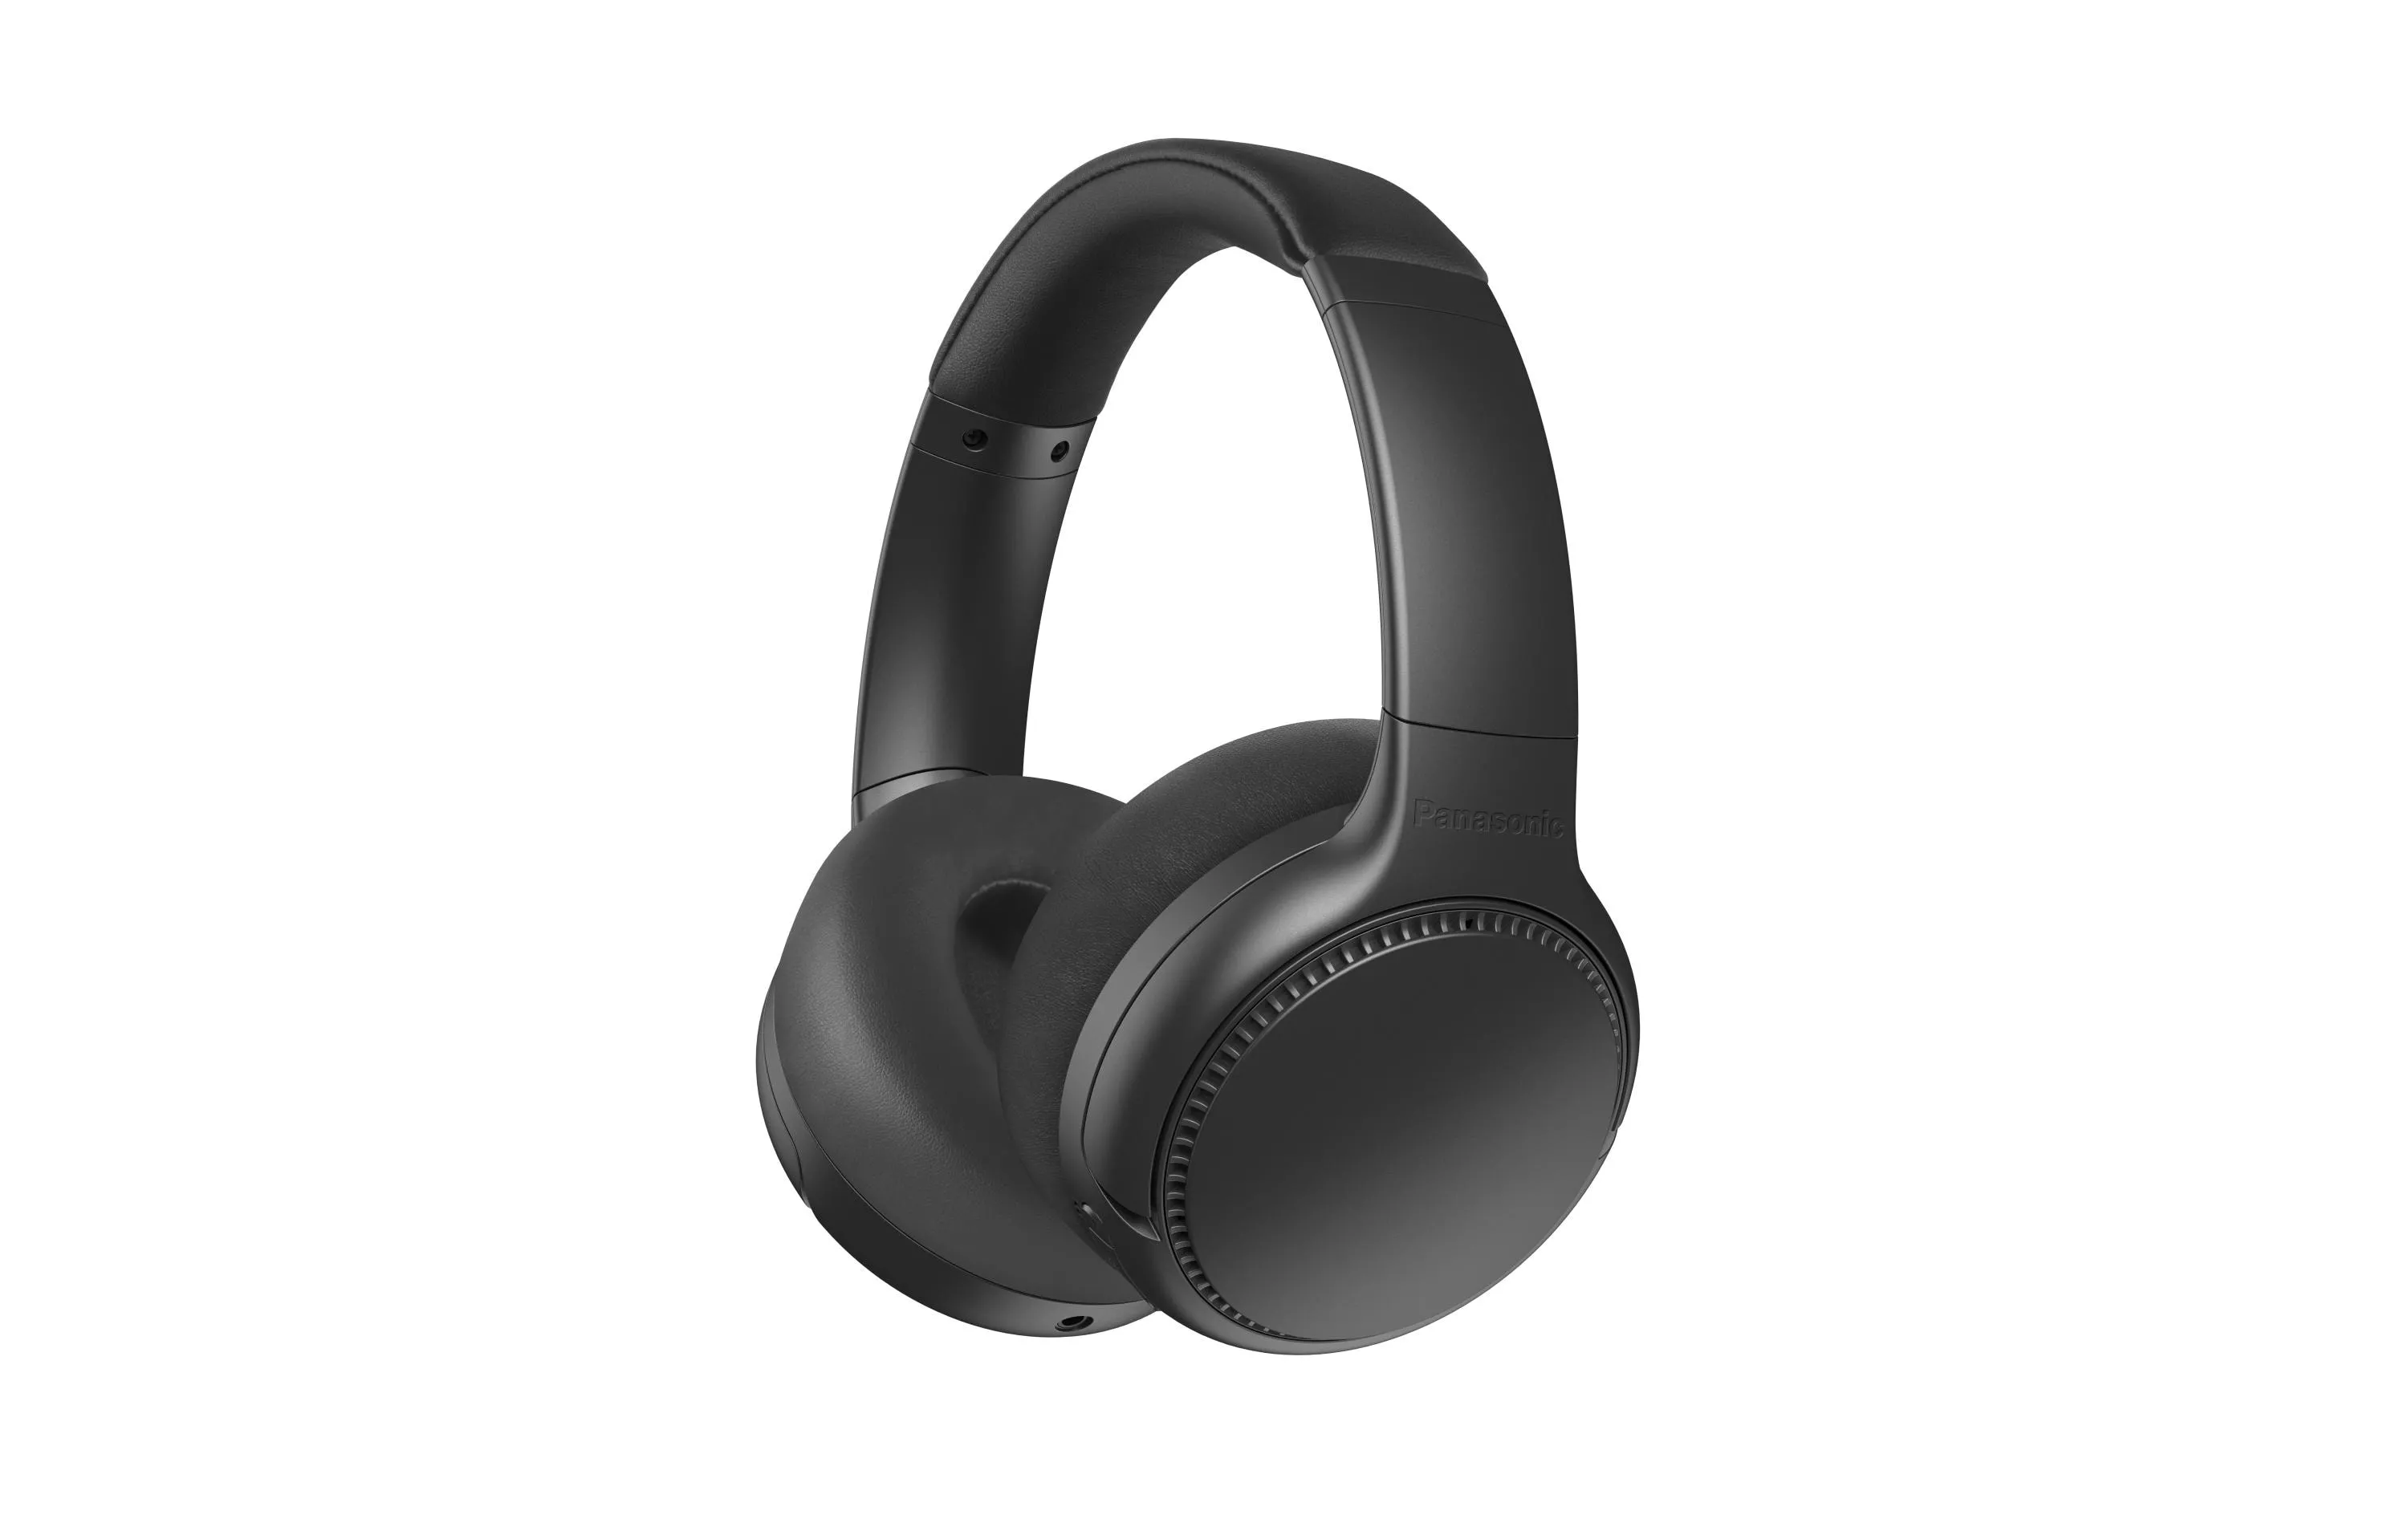 Casques supra-auriculaires Wireless RB-M700BE Noir